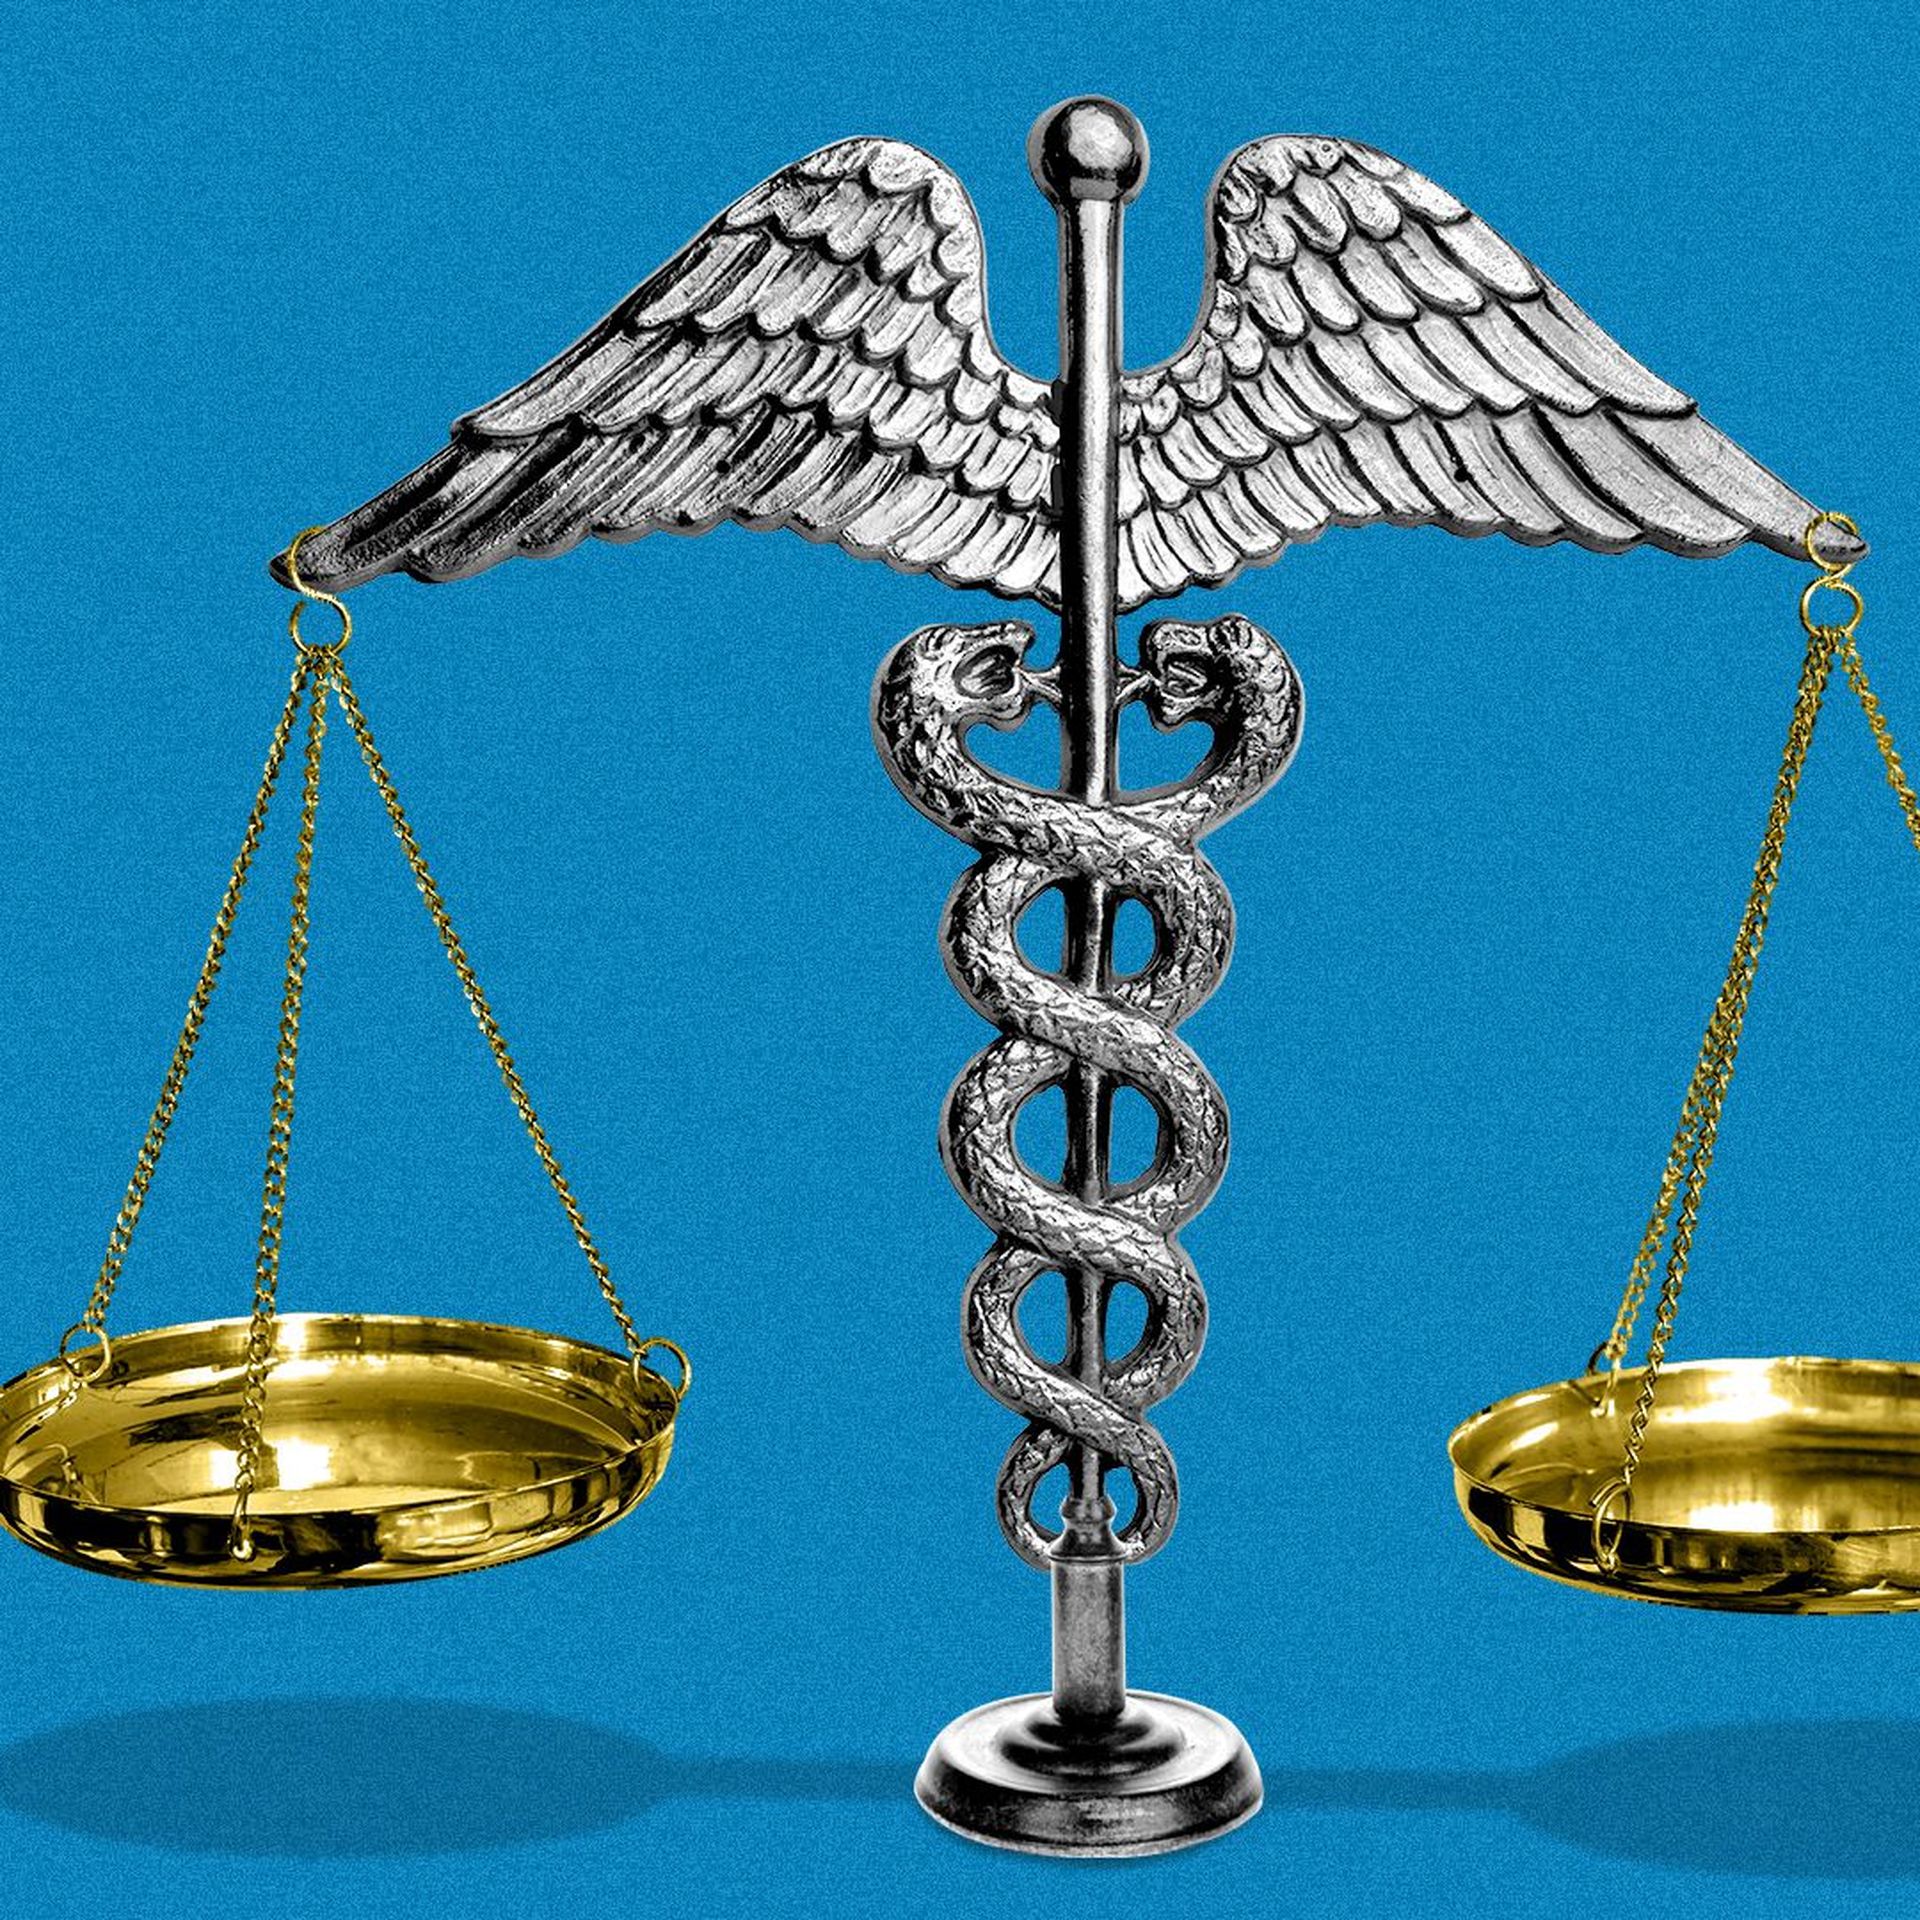 Illustration of the scales of justice hanging from a caduceus.